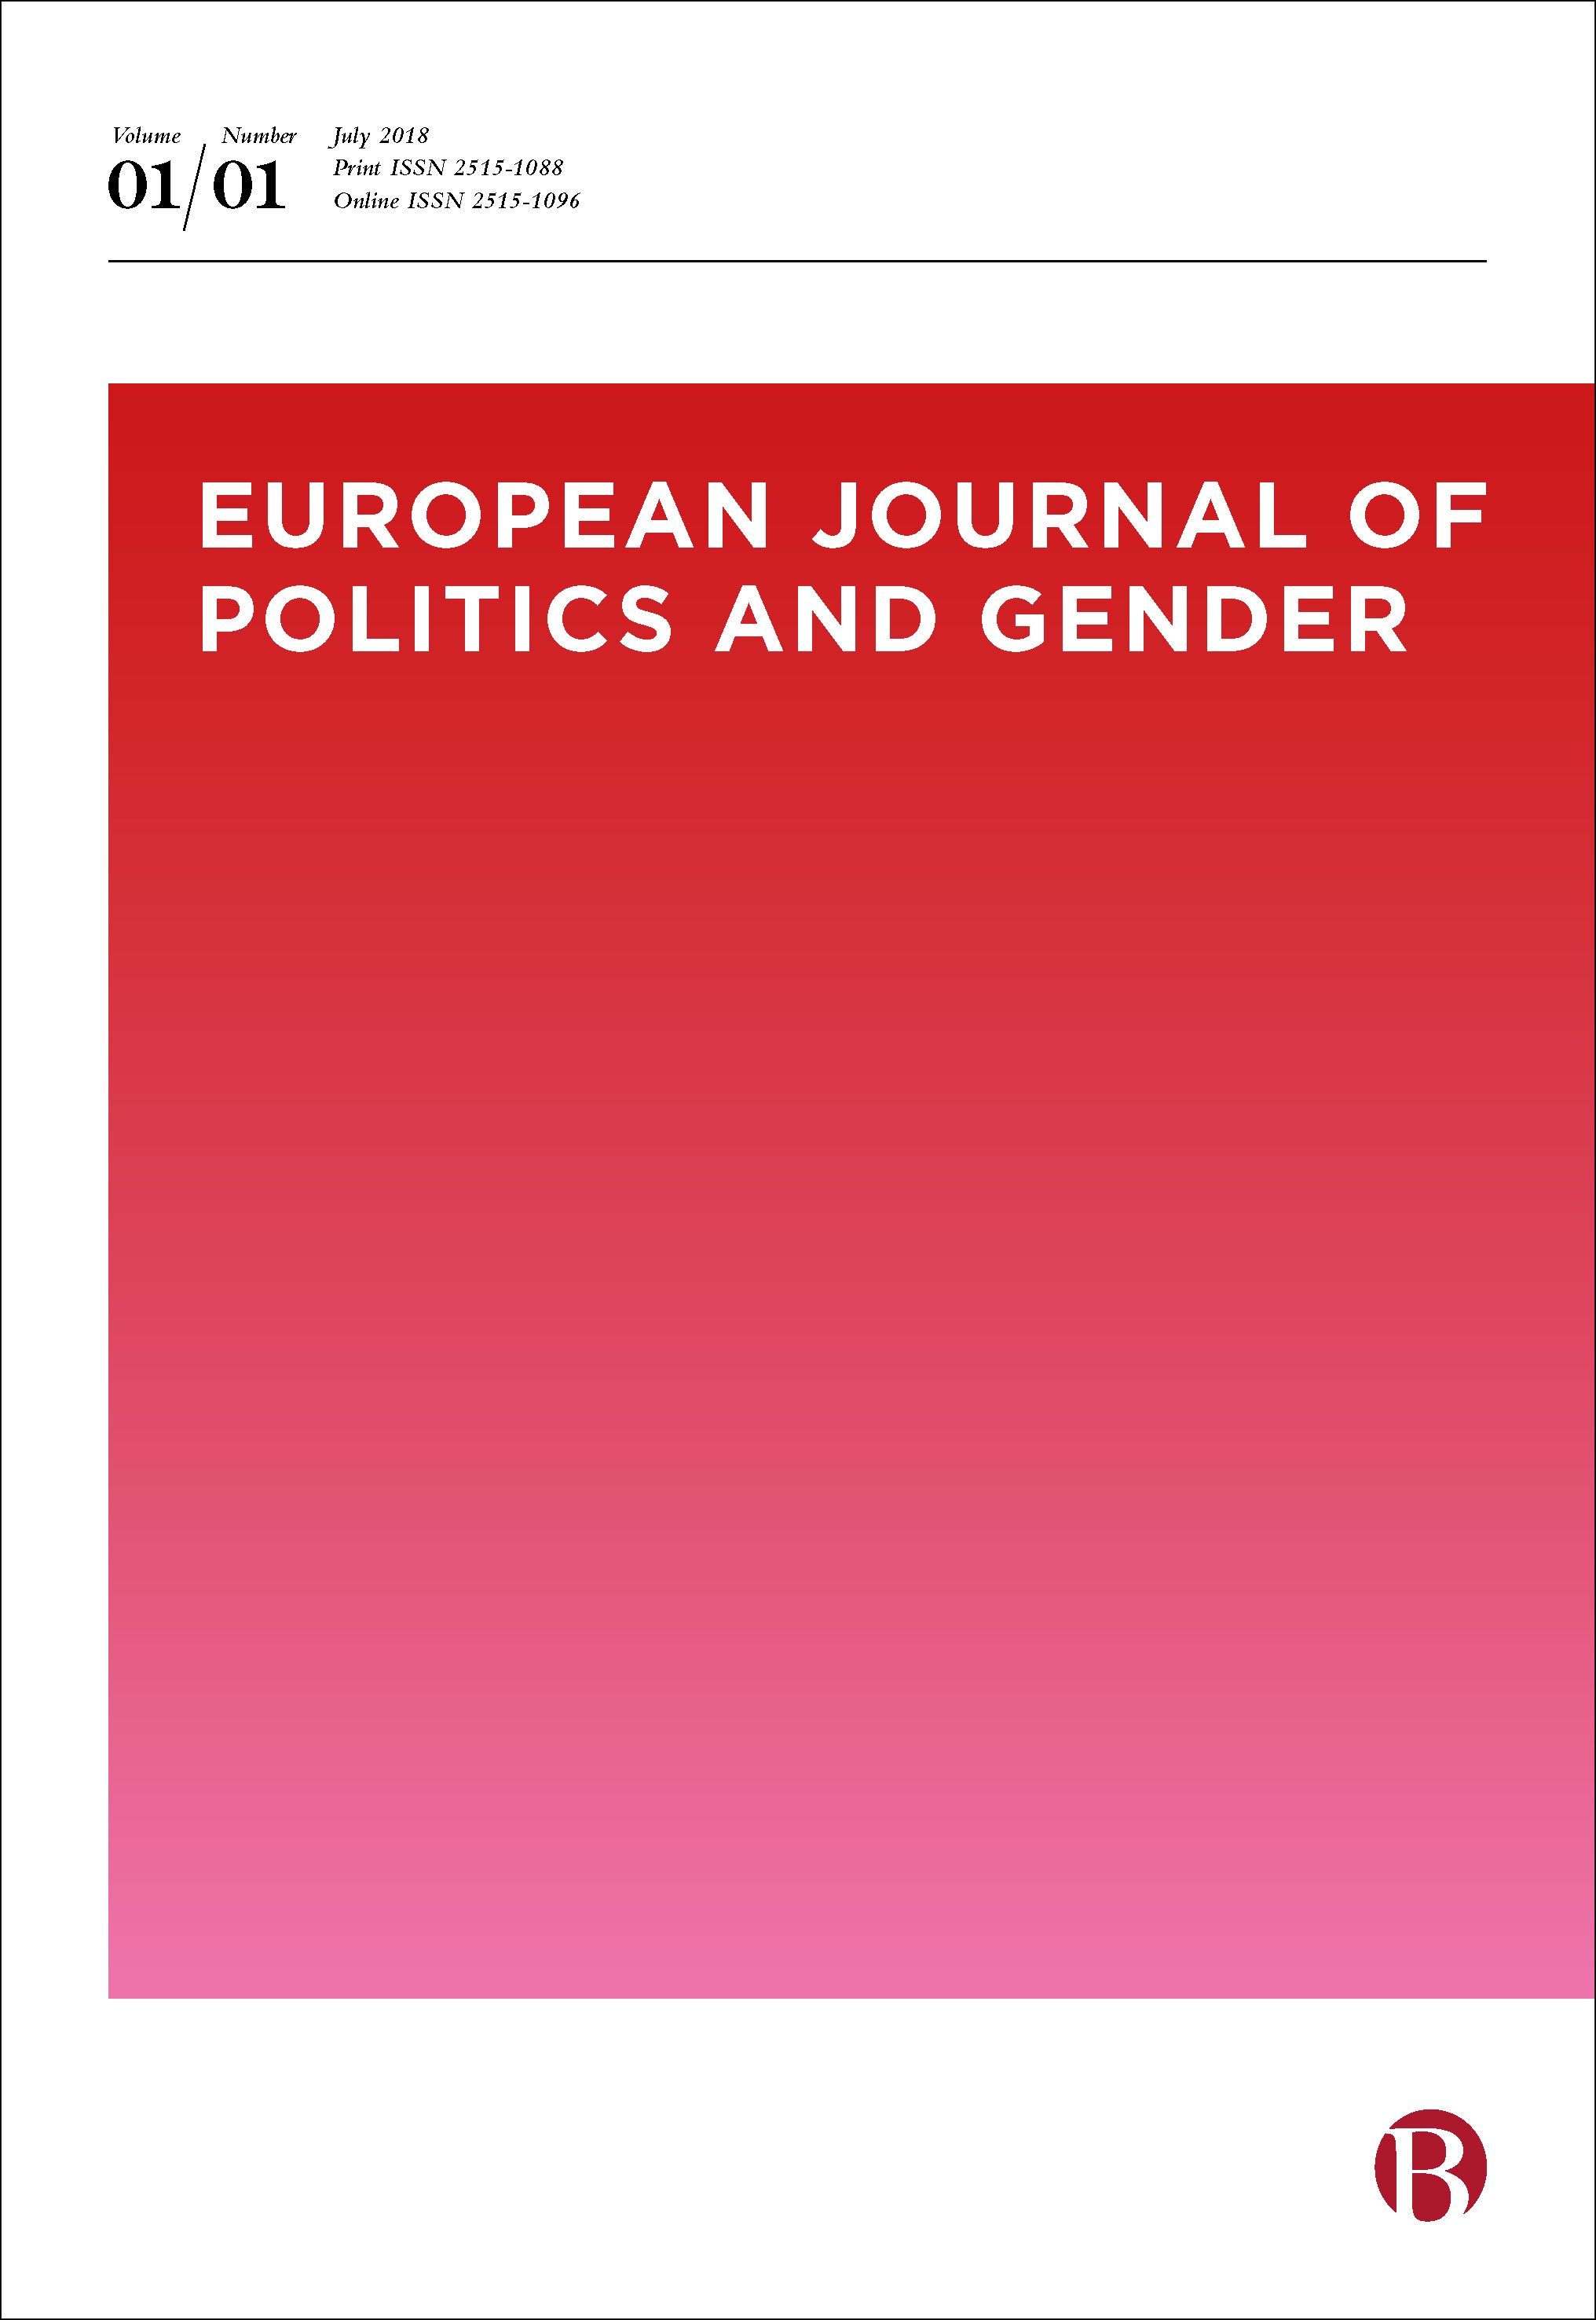 European journal of politics and gender cover